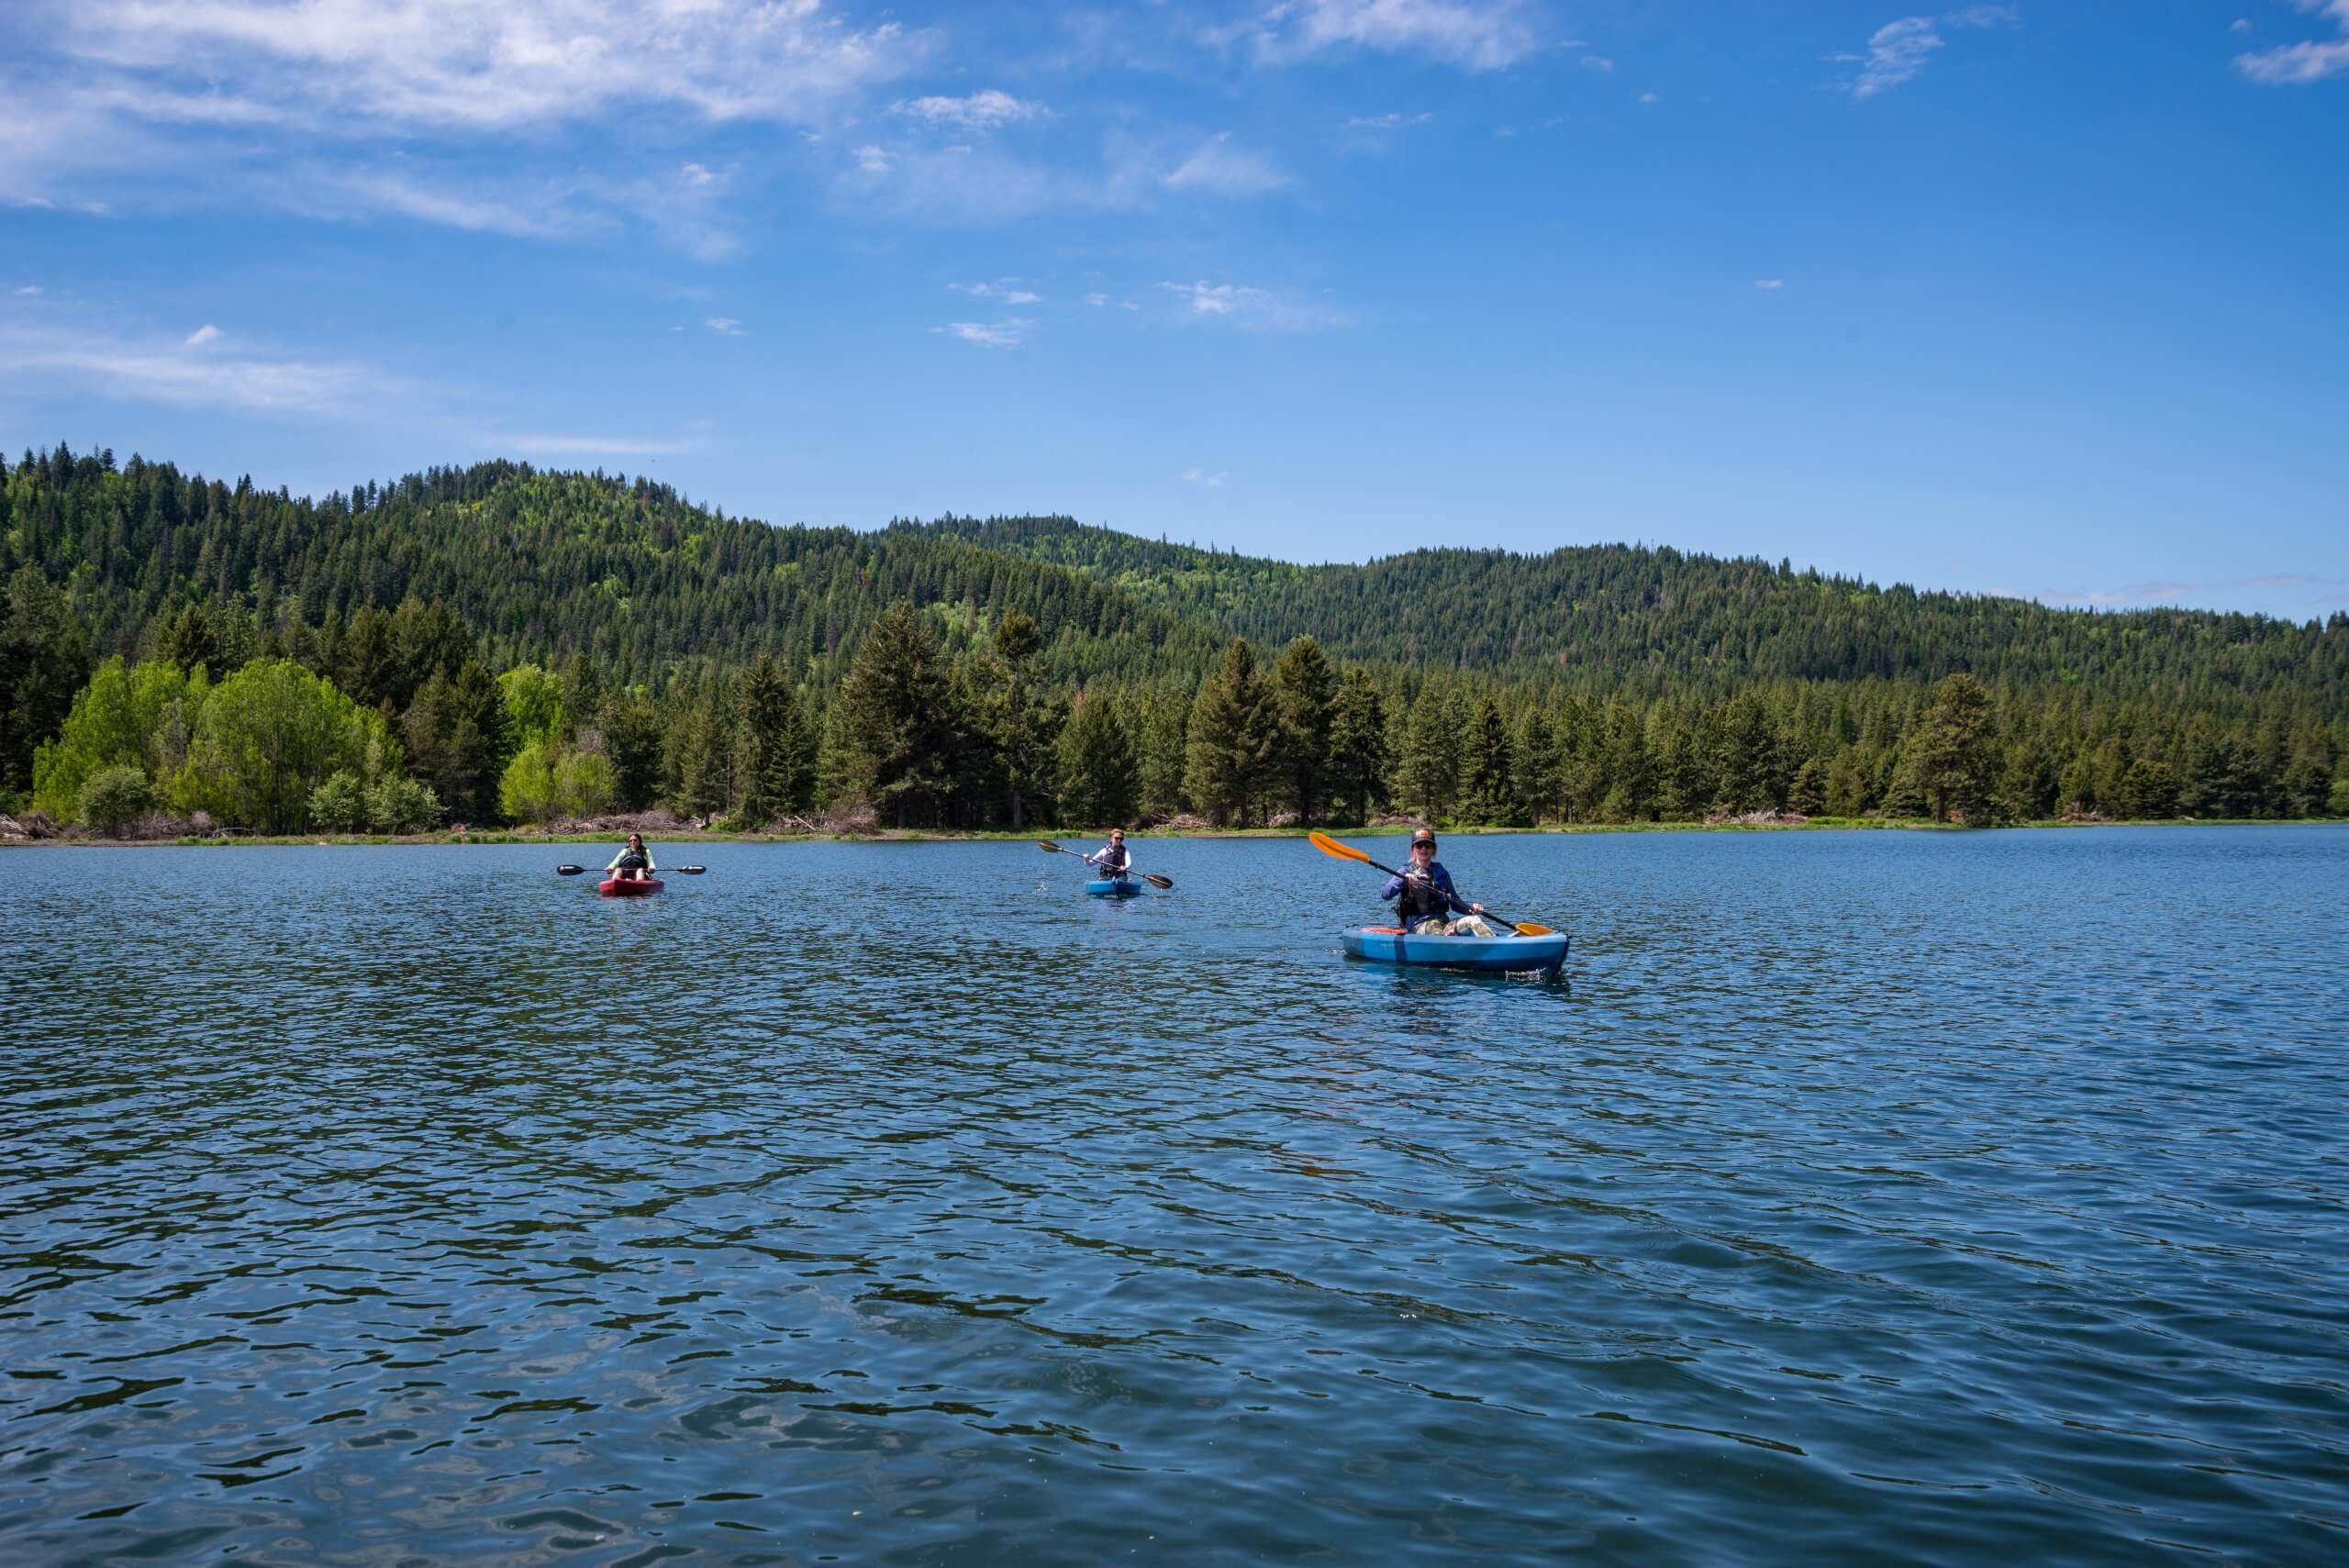 three people kayaking at Spirit Lake, with tree-covered hills in the background